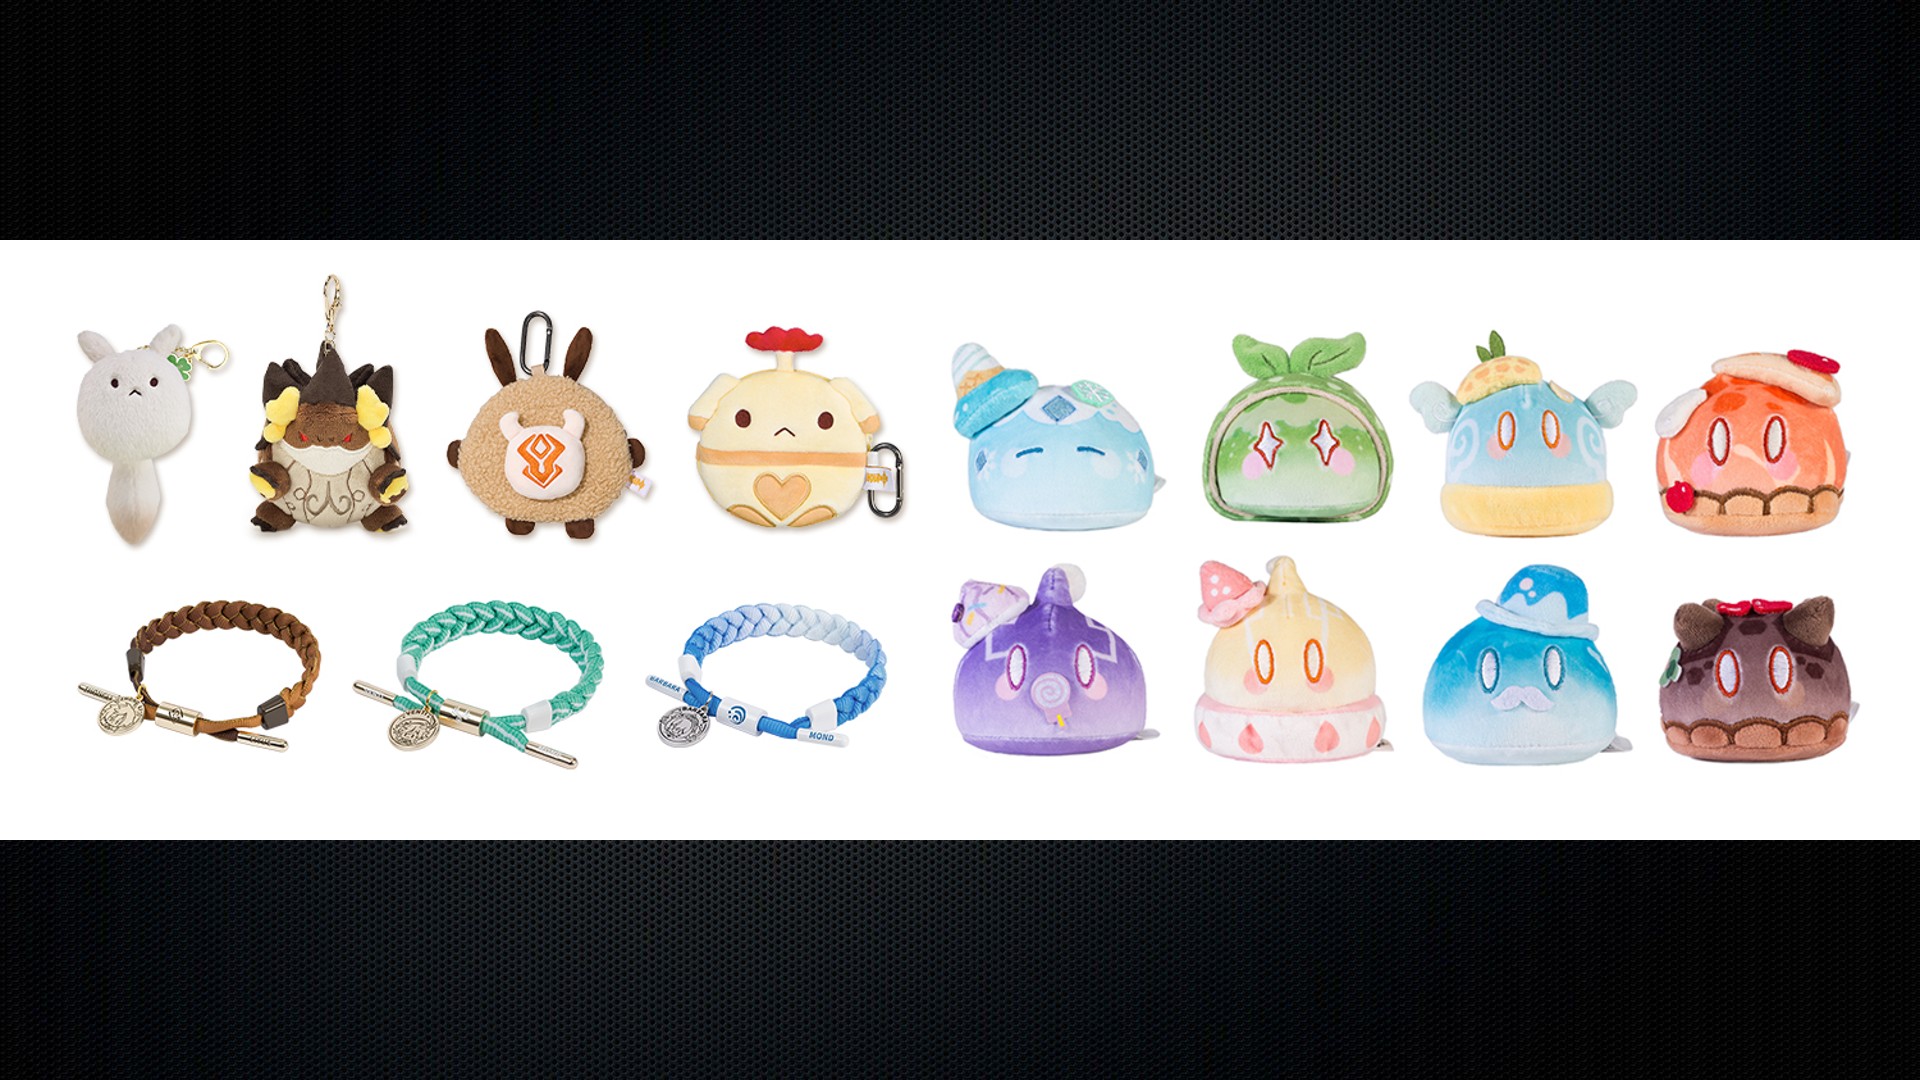 Genshin Impact is giving away merch to celebrate a huge milestone: plushies, keychains, and bracelets